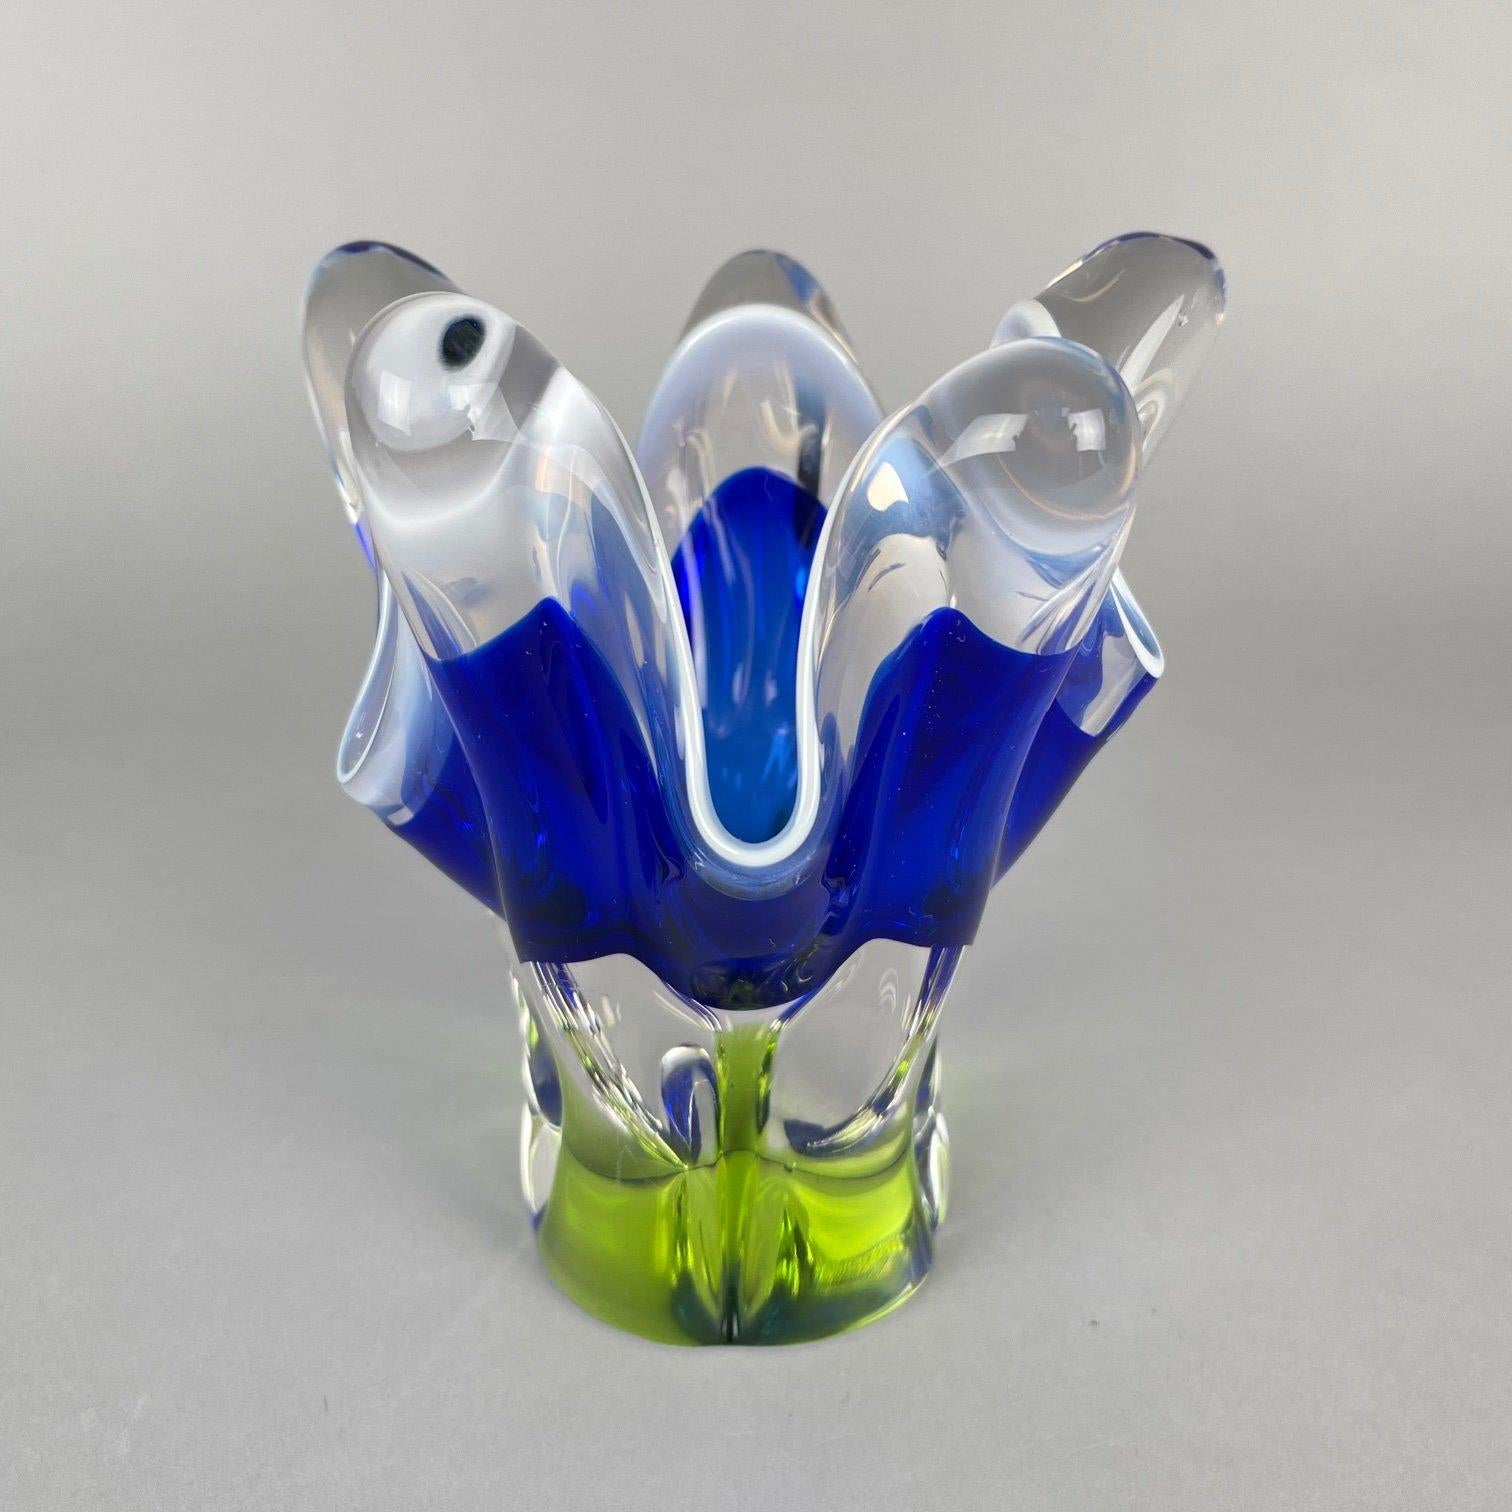 Beautiful Czech sculptural glass vase designed by Josef Hospodka in 1960's and made by the Chribska Glassworks. Combination of blue, green and clear glass with a lovely opaque white rim. 
Good vintage condition with some signs of use (see photo).